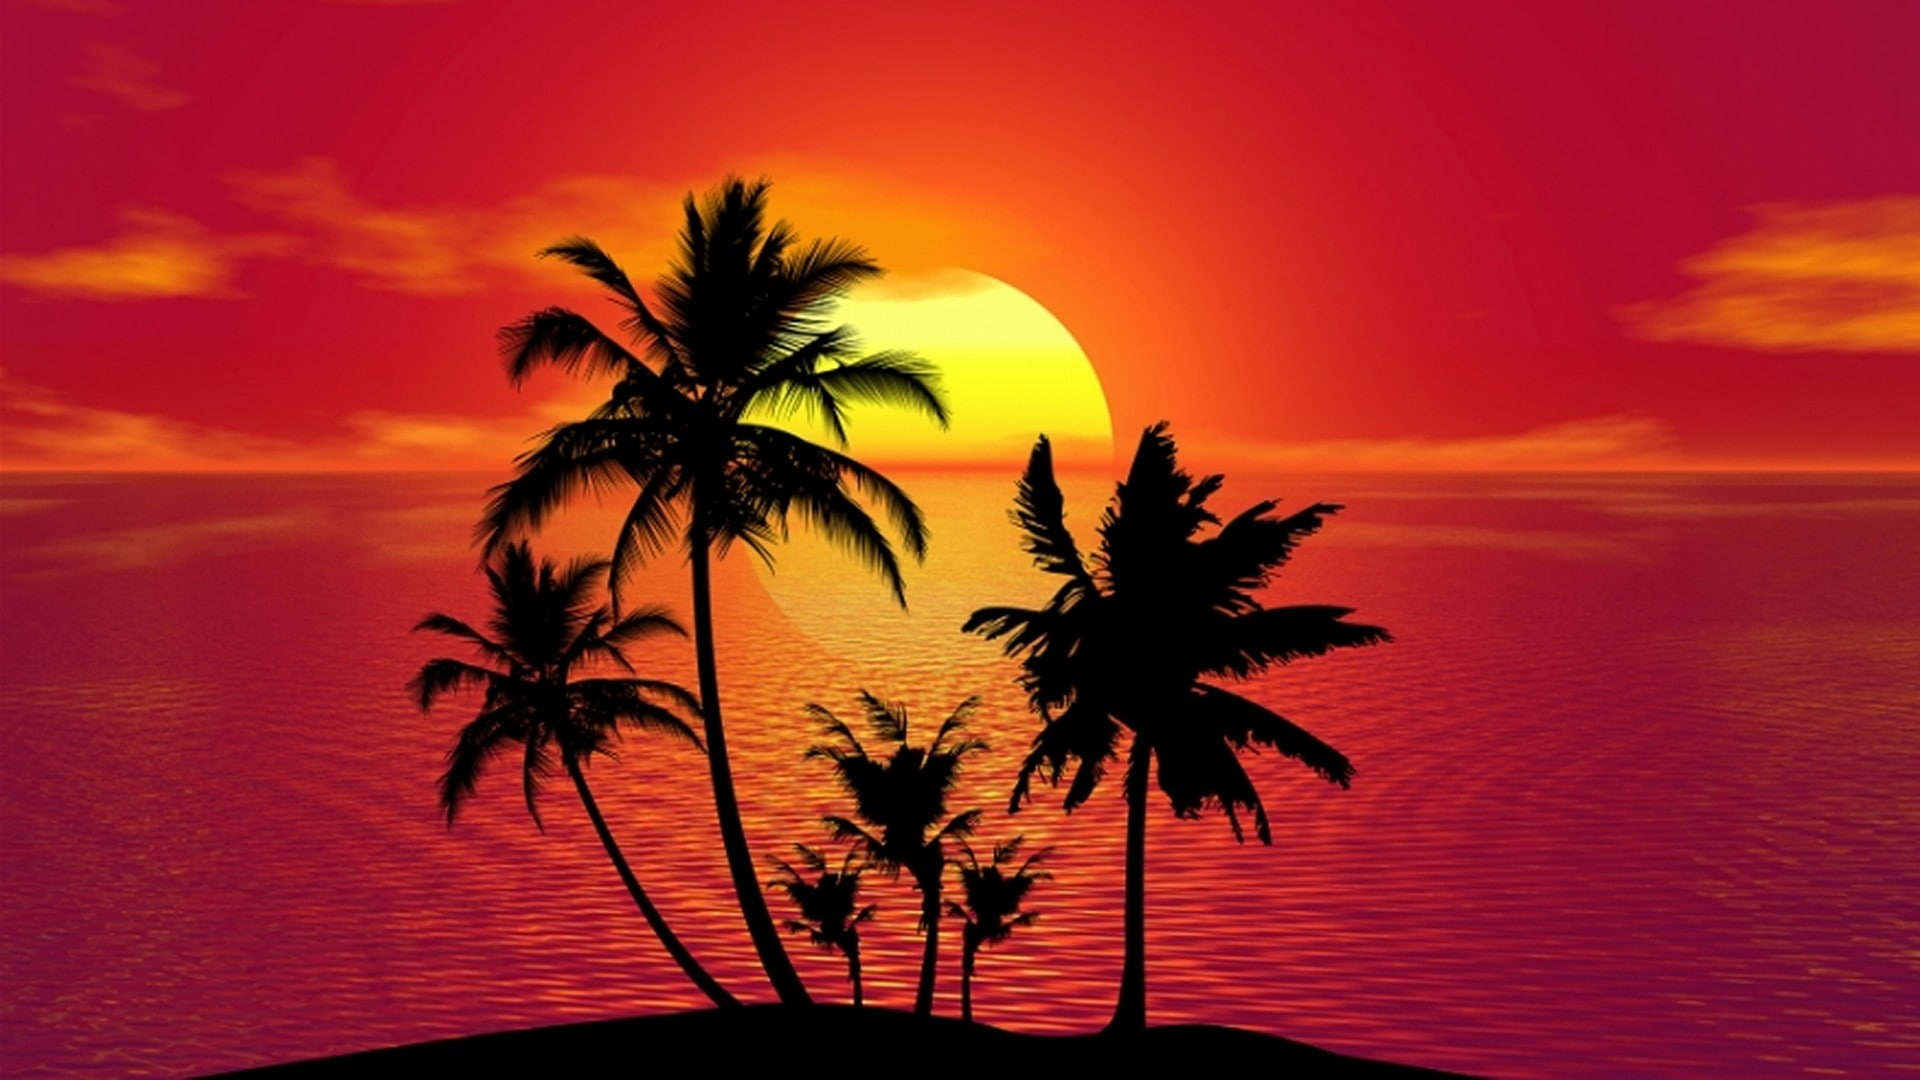 Palms, silhouette, palm tree, sunset, red sky, red sunset, tropics wallpaper